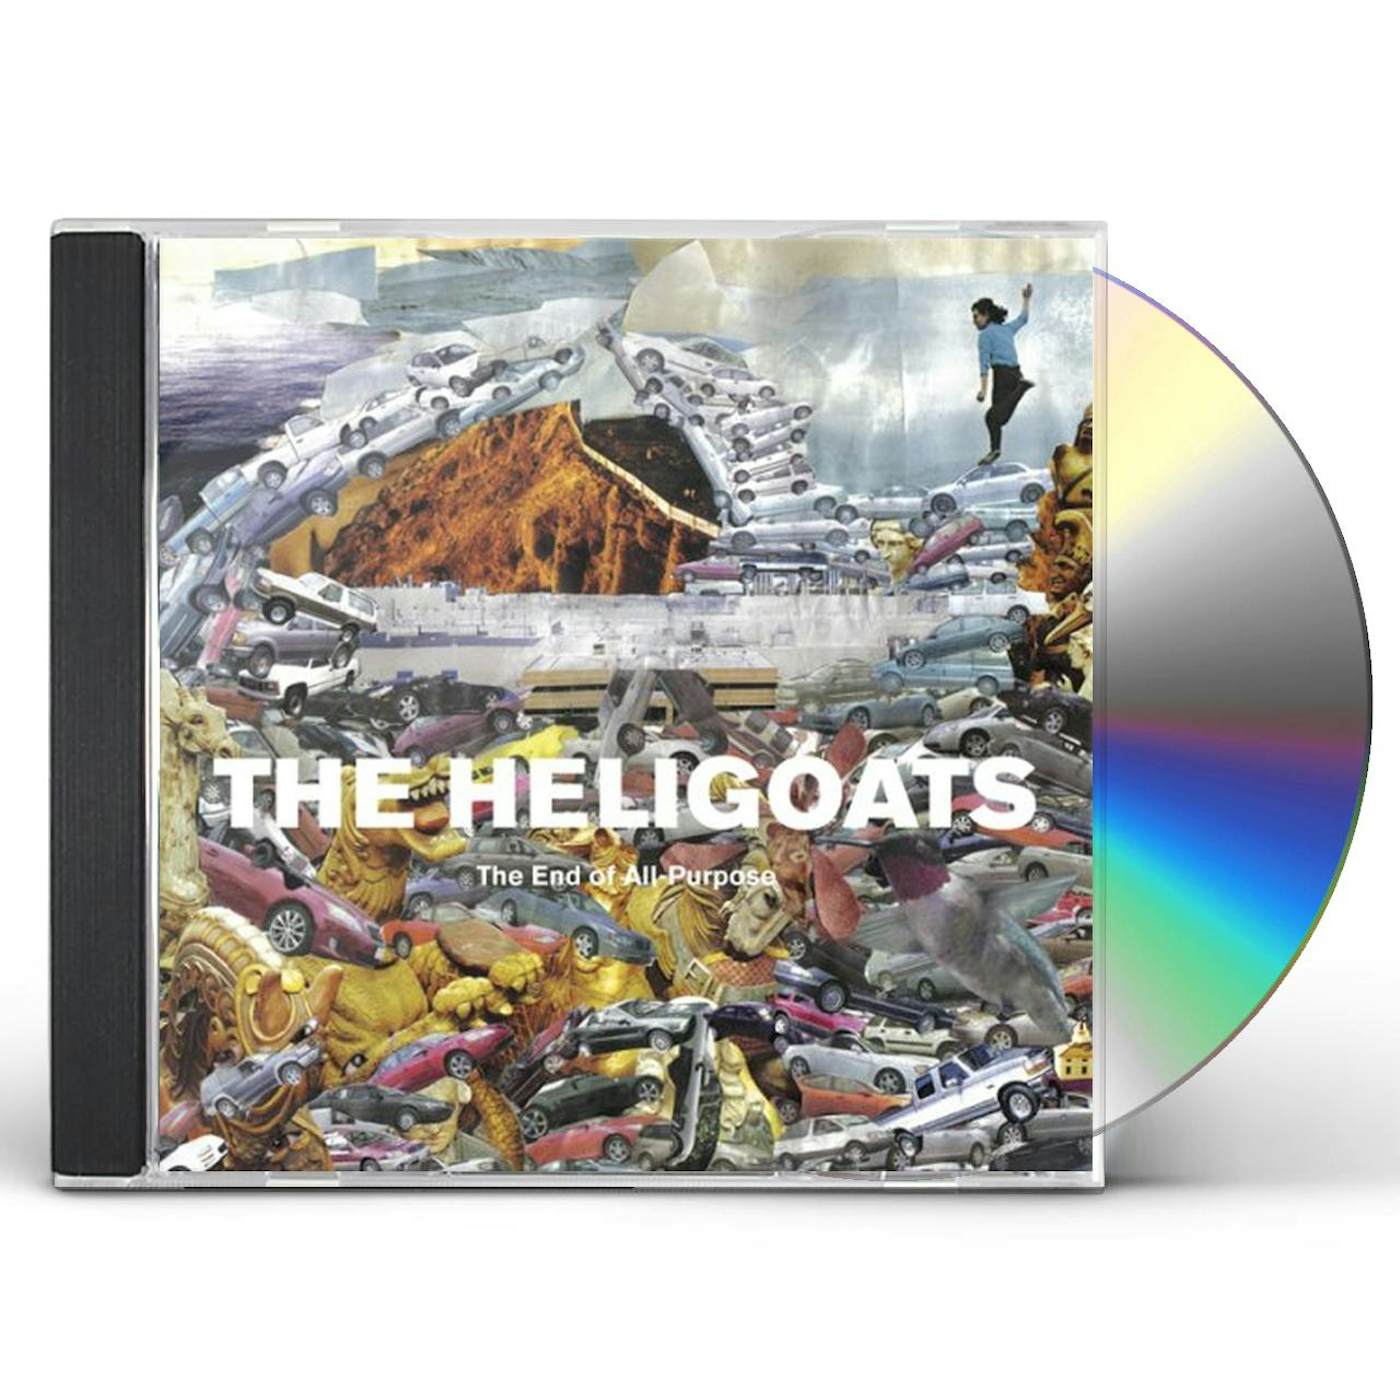 The Heligoats END OF ALL PURPOSE CD